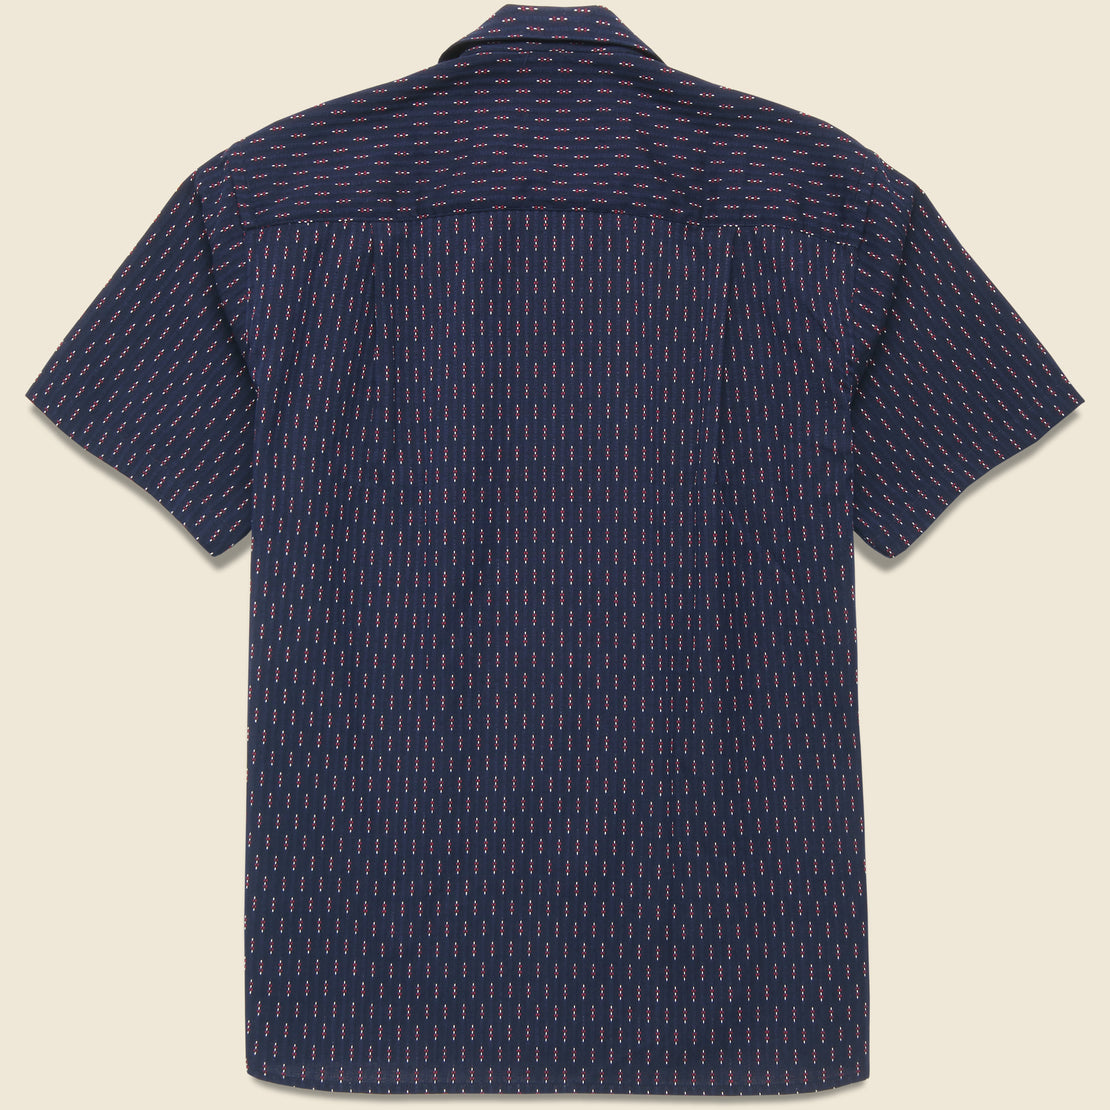 Deadstock Japanese Dobby Shirt - Navy - Gitman Vintage - STAG Provisions - Tops - S/S Woven - Other Pattern